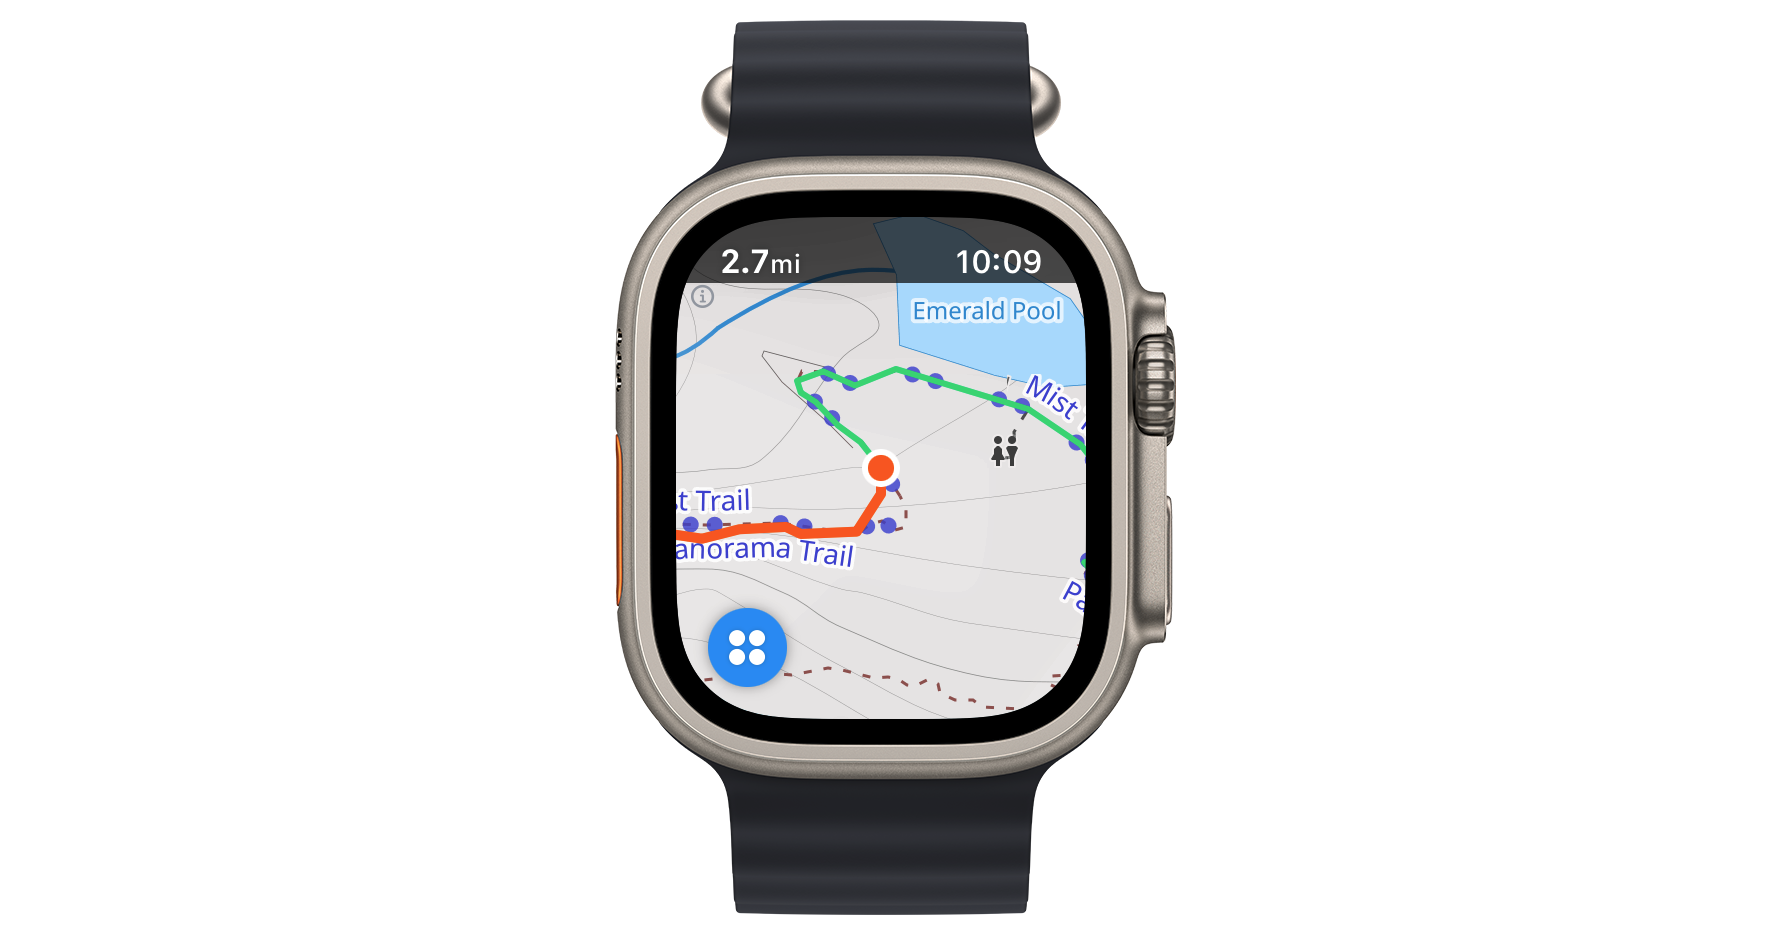 Pedometer++ Adds Support for Live Activities, Map-Based Workout Mode for Apple Watch